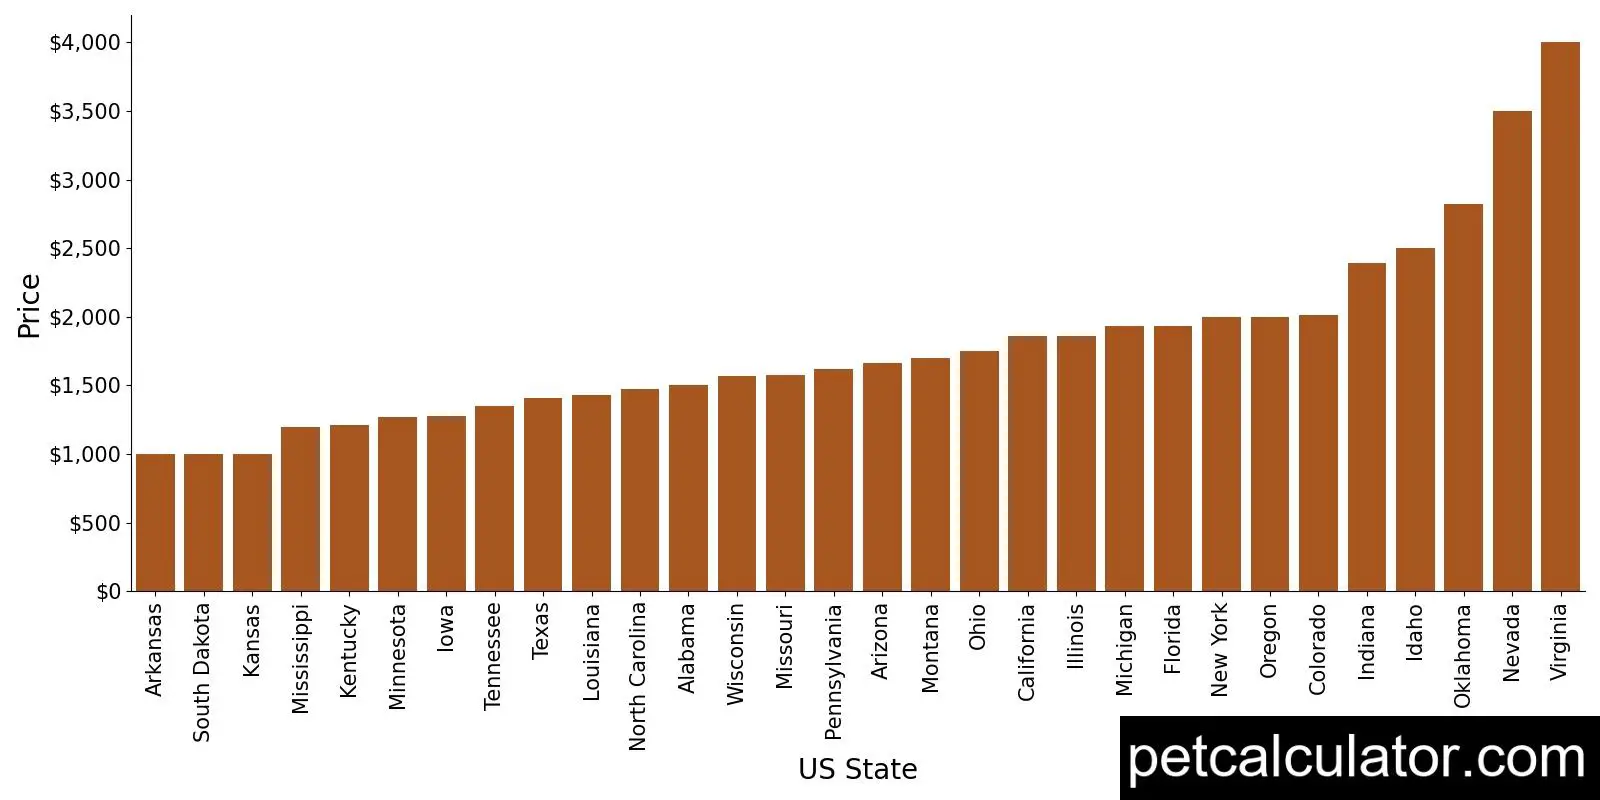 Price of Cocker Spaniel by US State 